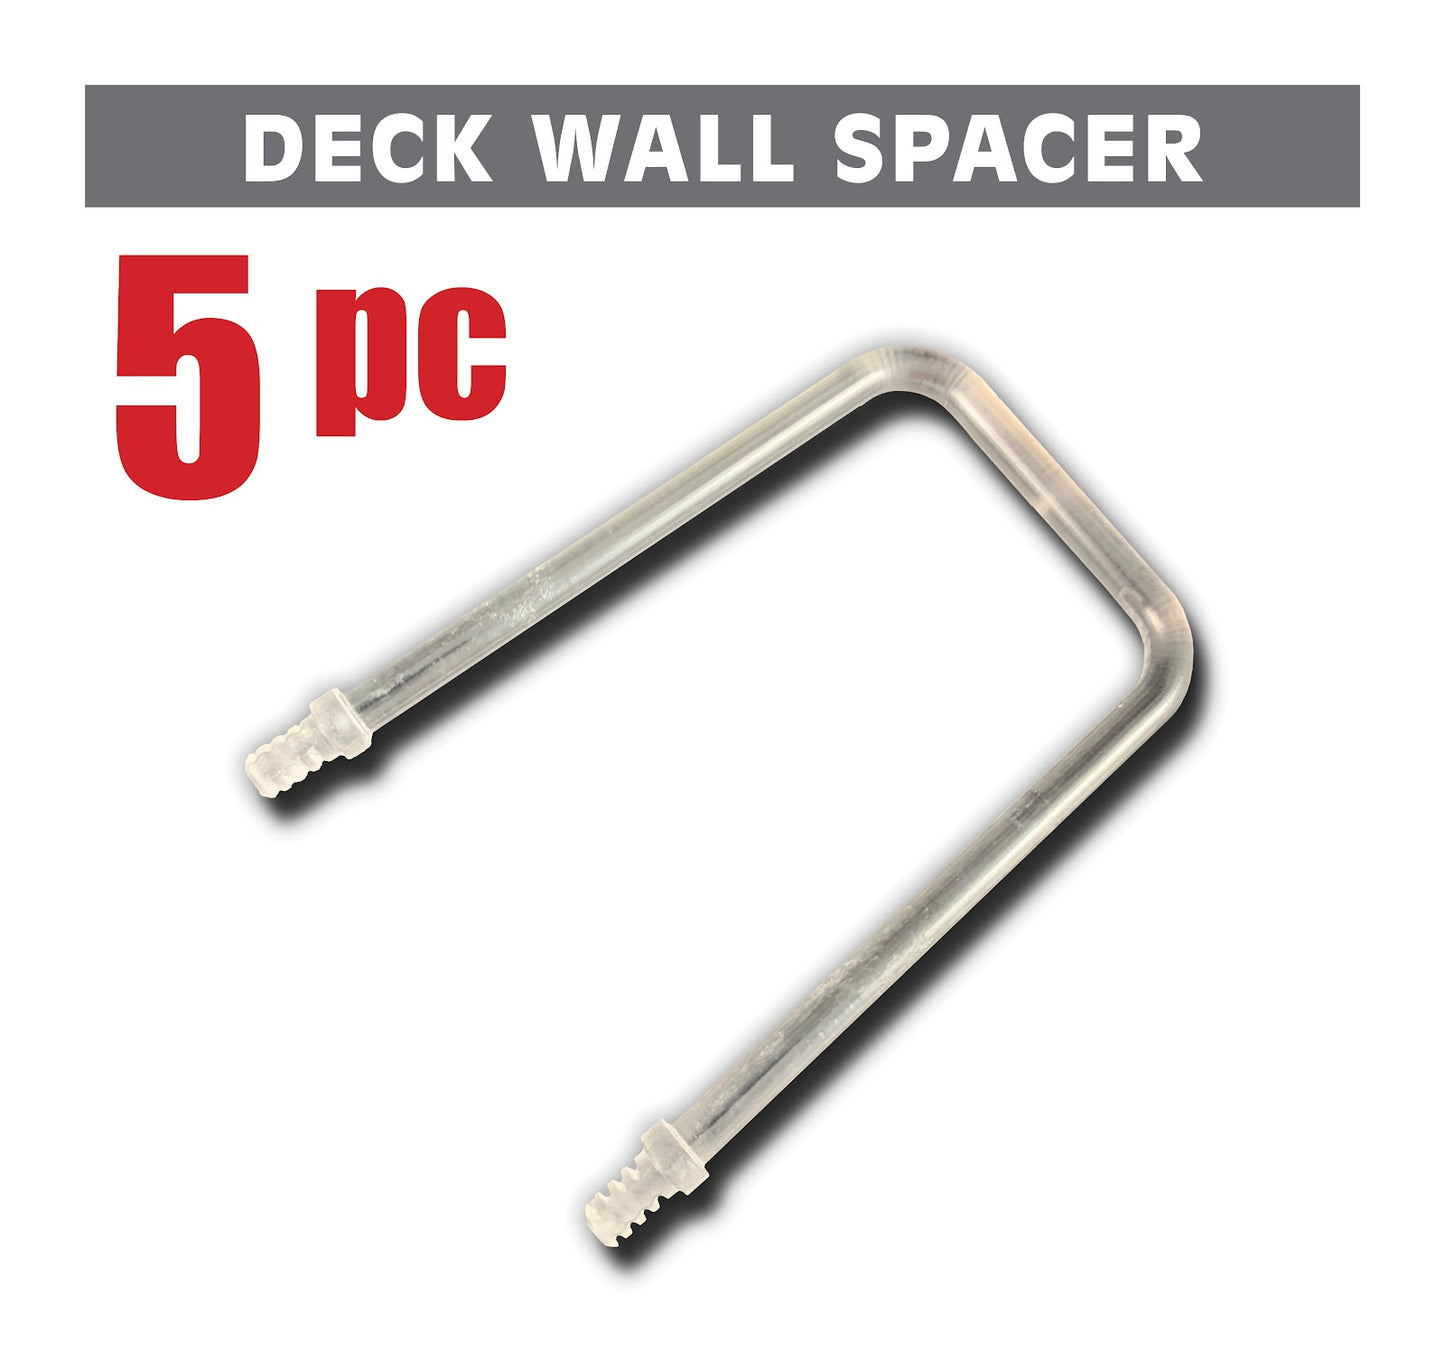 Deck Wall Spacer (For vertically hung decks)